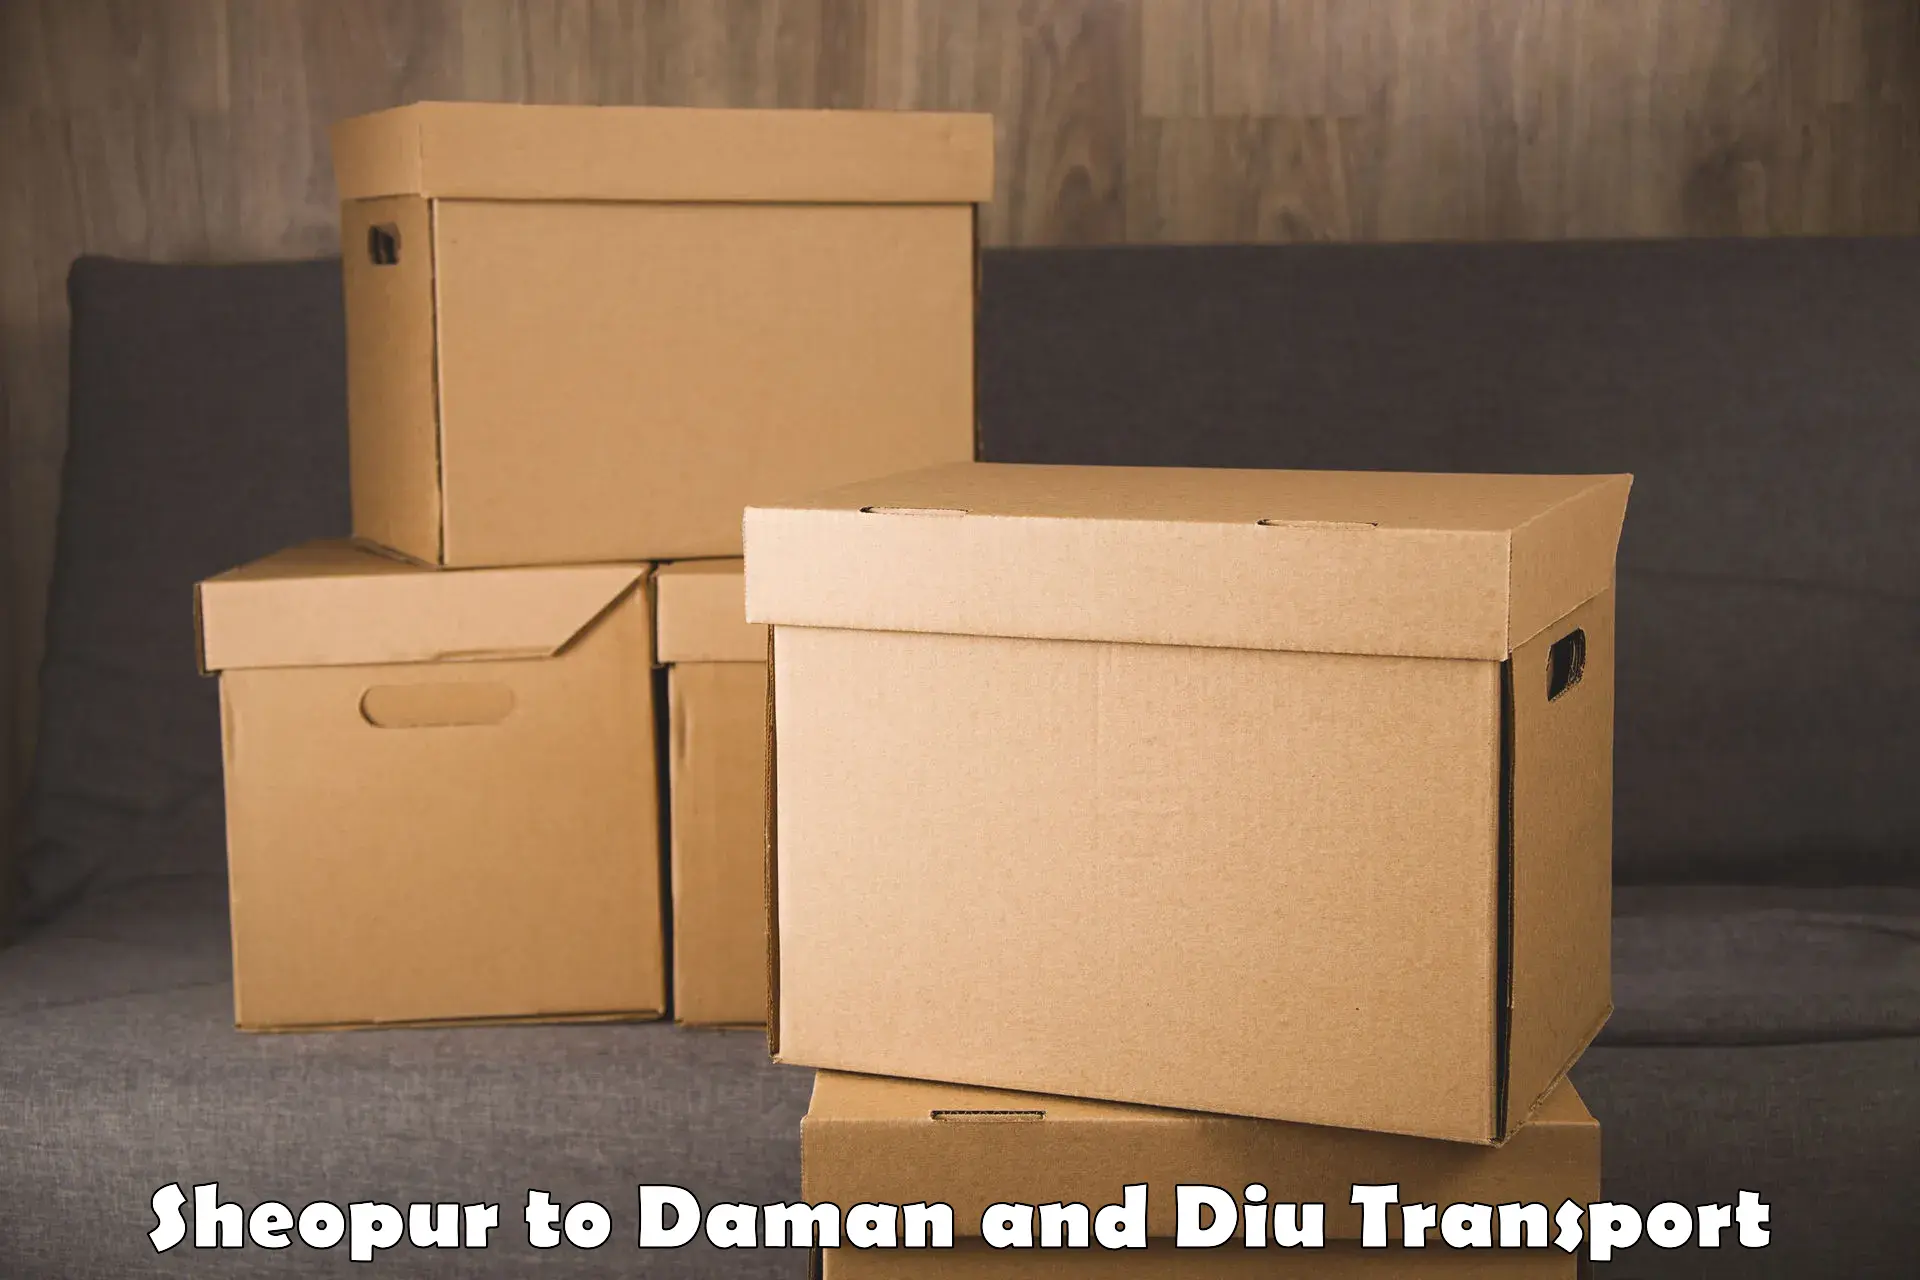 Parcel transport services Sheopur to Diu